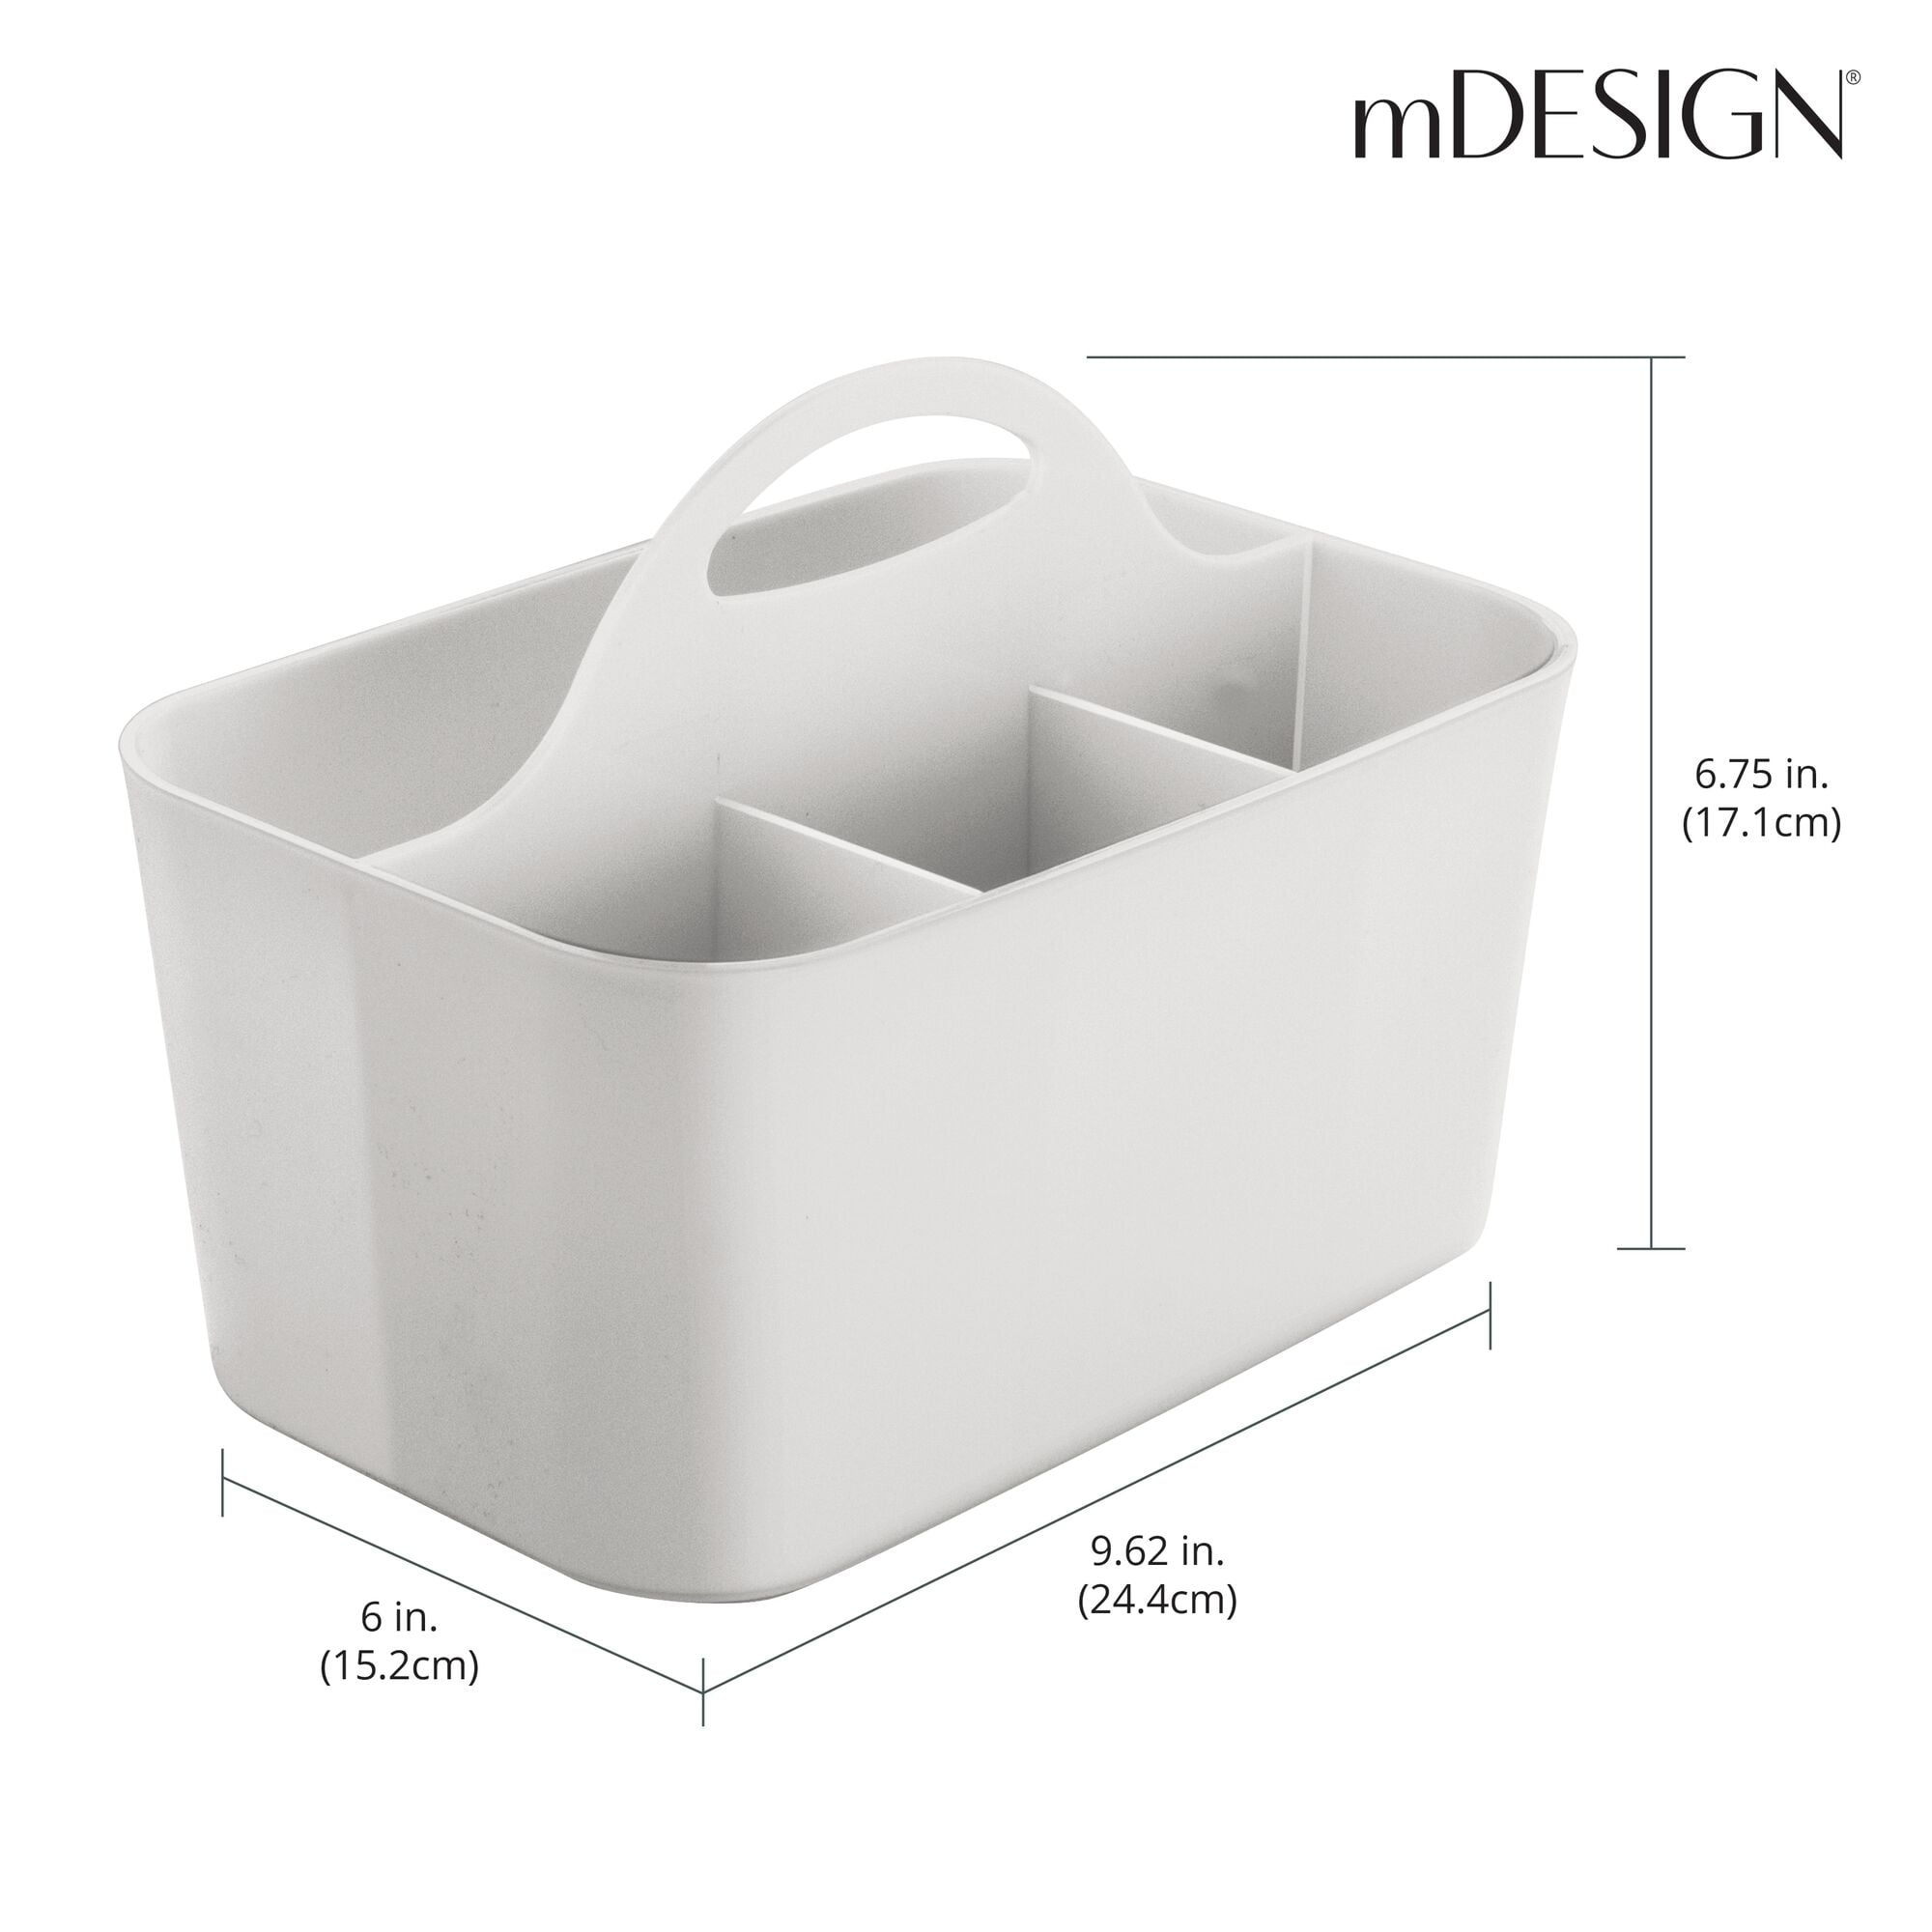 Mdesign Small Plastic Shower/Bath Storage Organizer Caddy Tote With Handle  For Dorm, Shelf, Cabinet - Hold Soap, Shampoo, Conditioner, Combs, Brushes  - Imported Products from USA - iBhejo